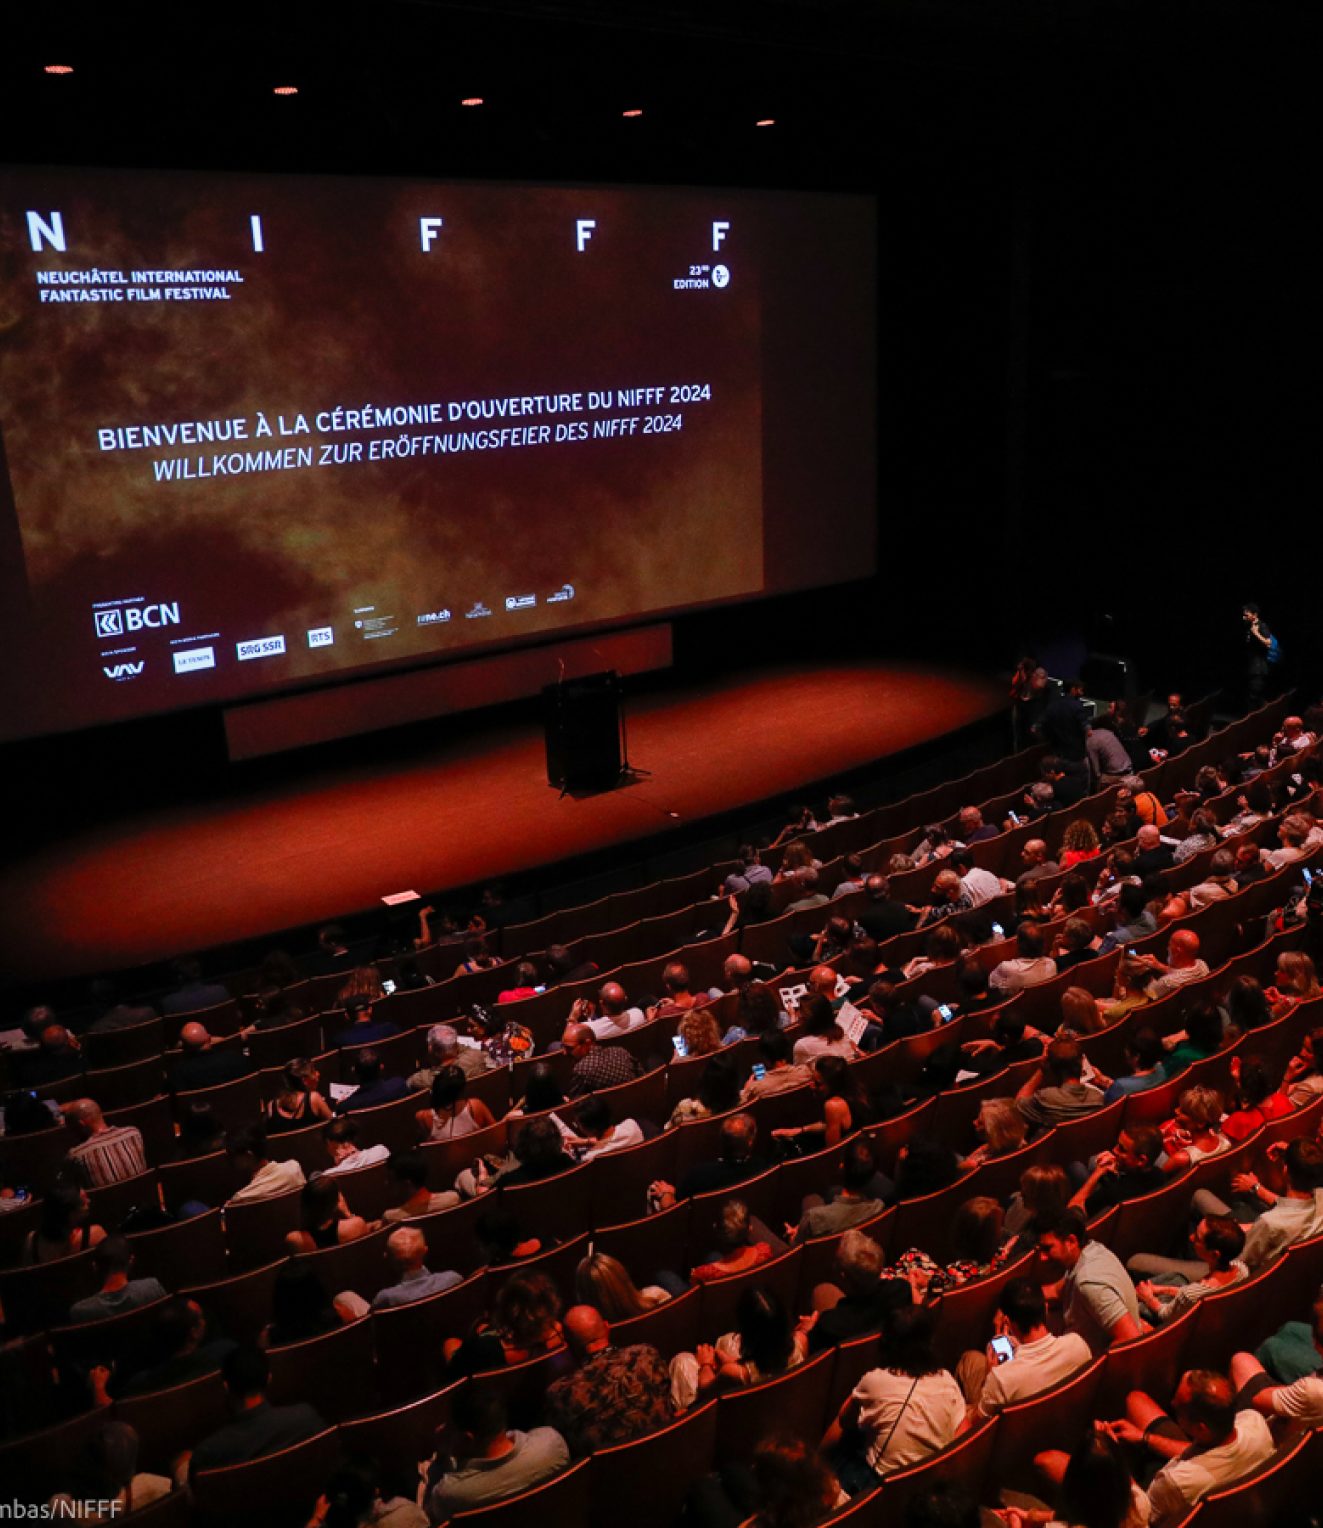 NIFFF 2024: A PROMISING FIRST WEEKEND